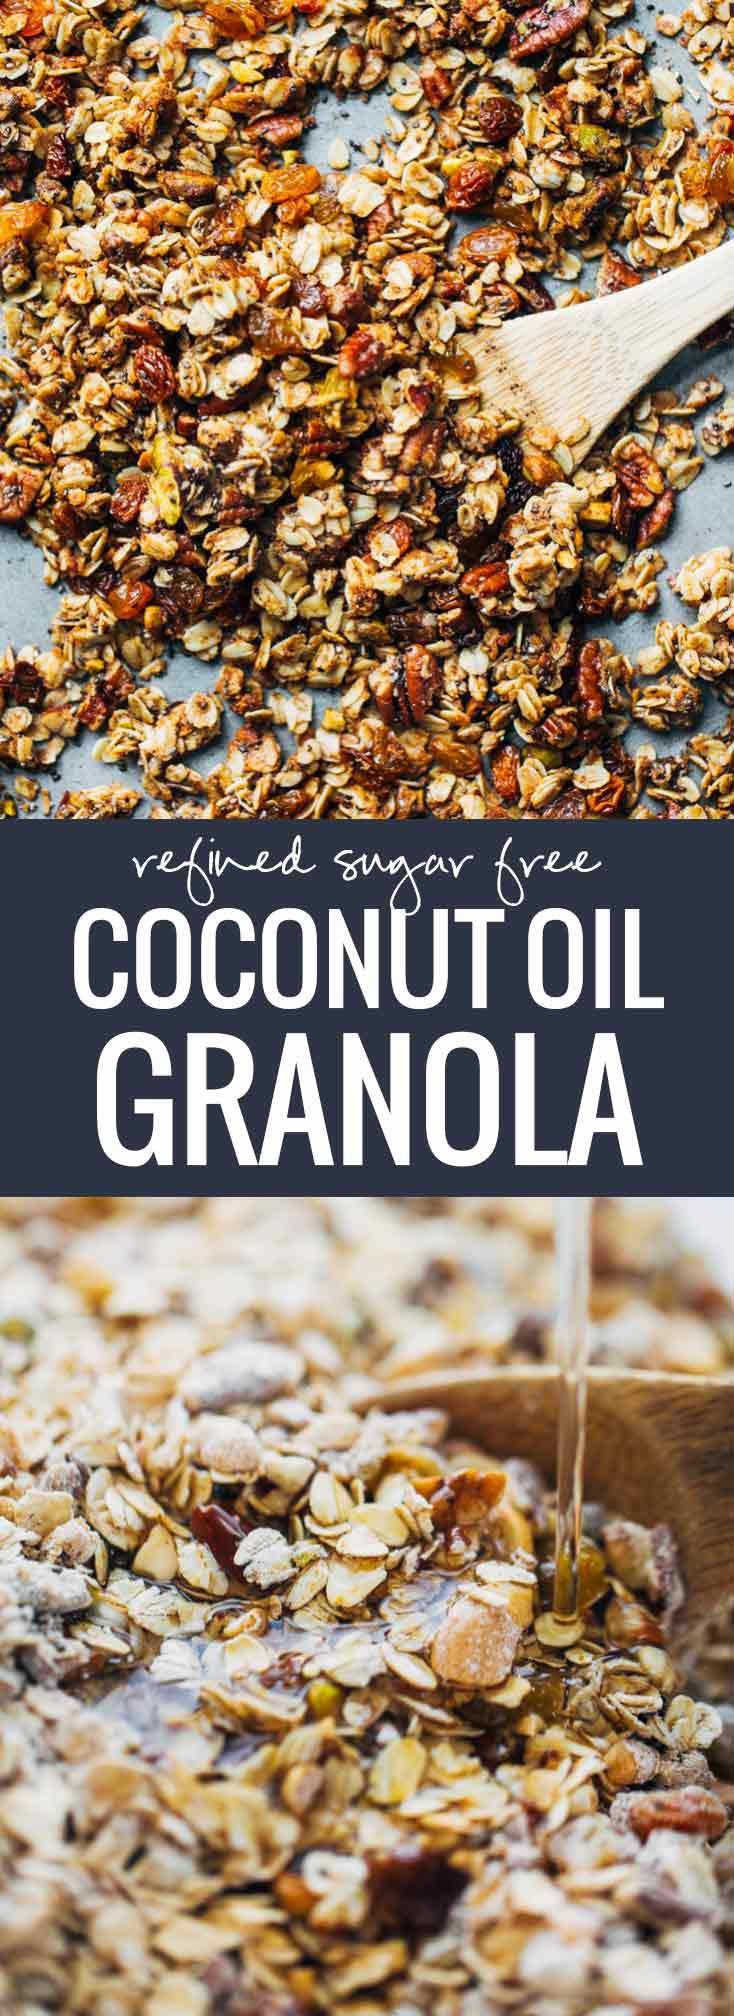 Favorite Coconut Oil Granola - packed with oats, nuts, and dried fruit and NO refined sugar! This is our all time FAVORITE granola recipe!